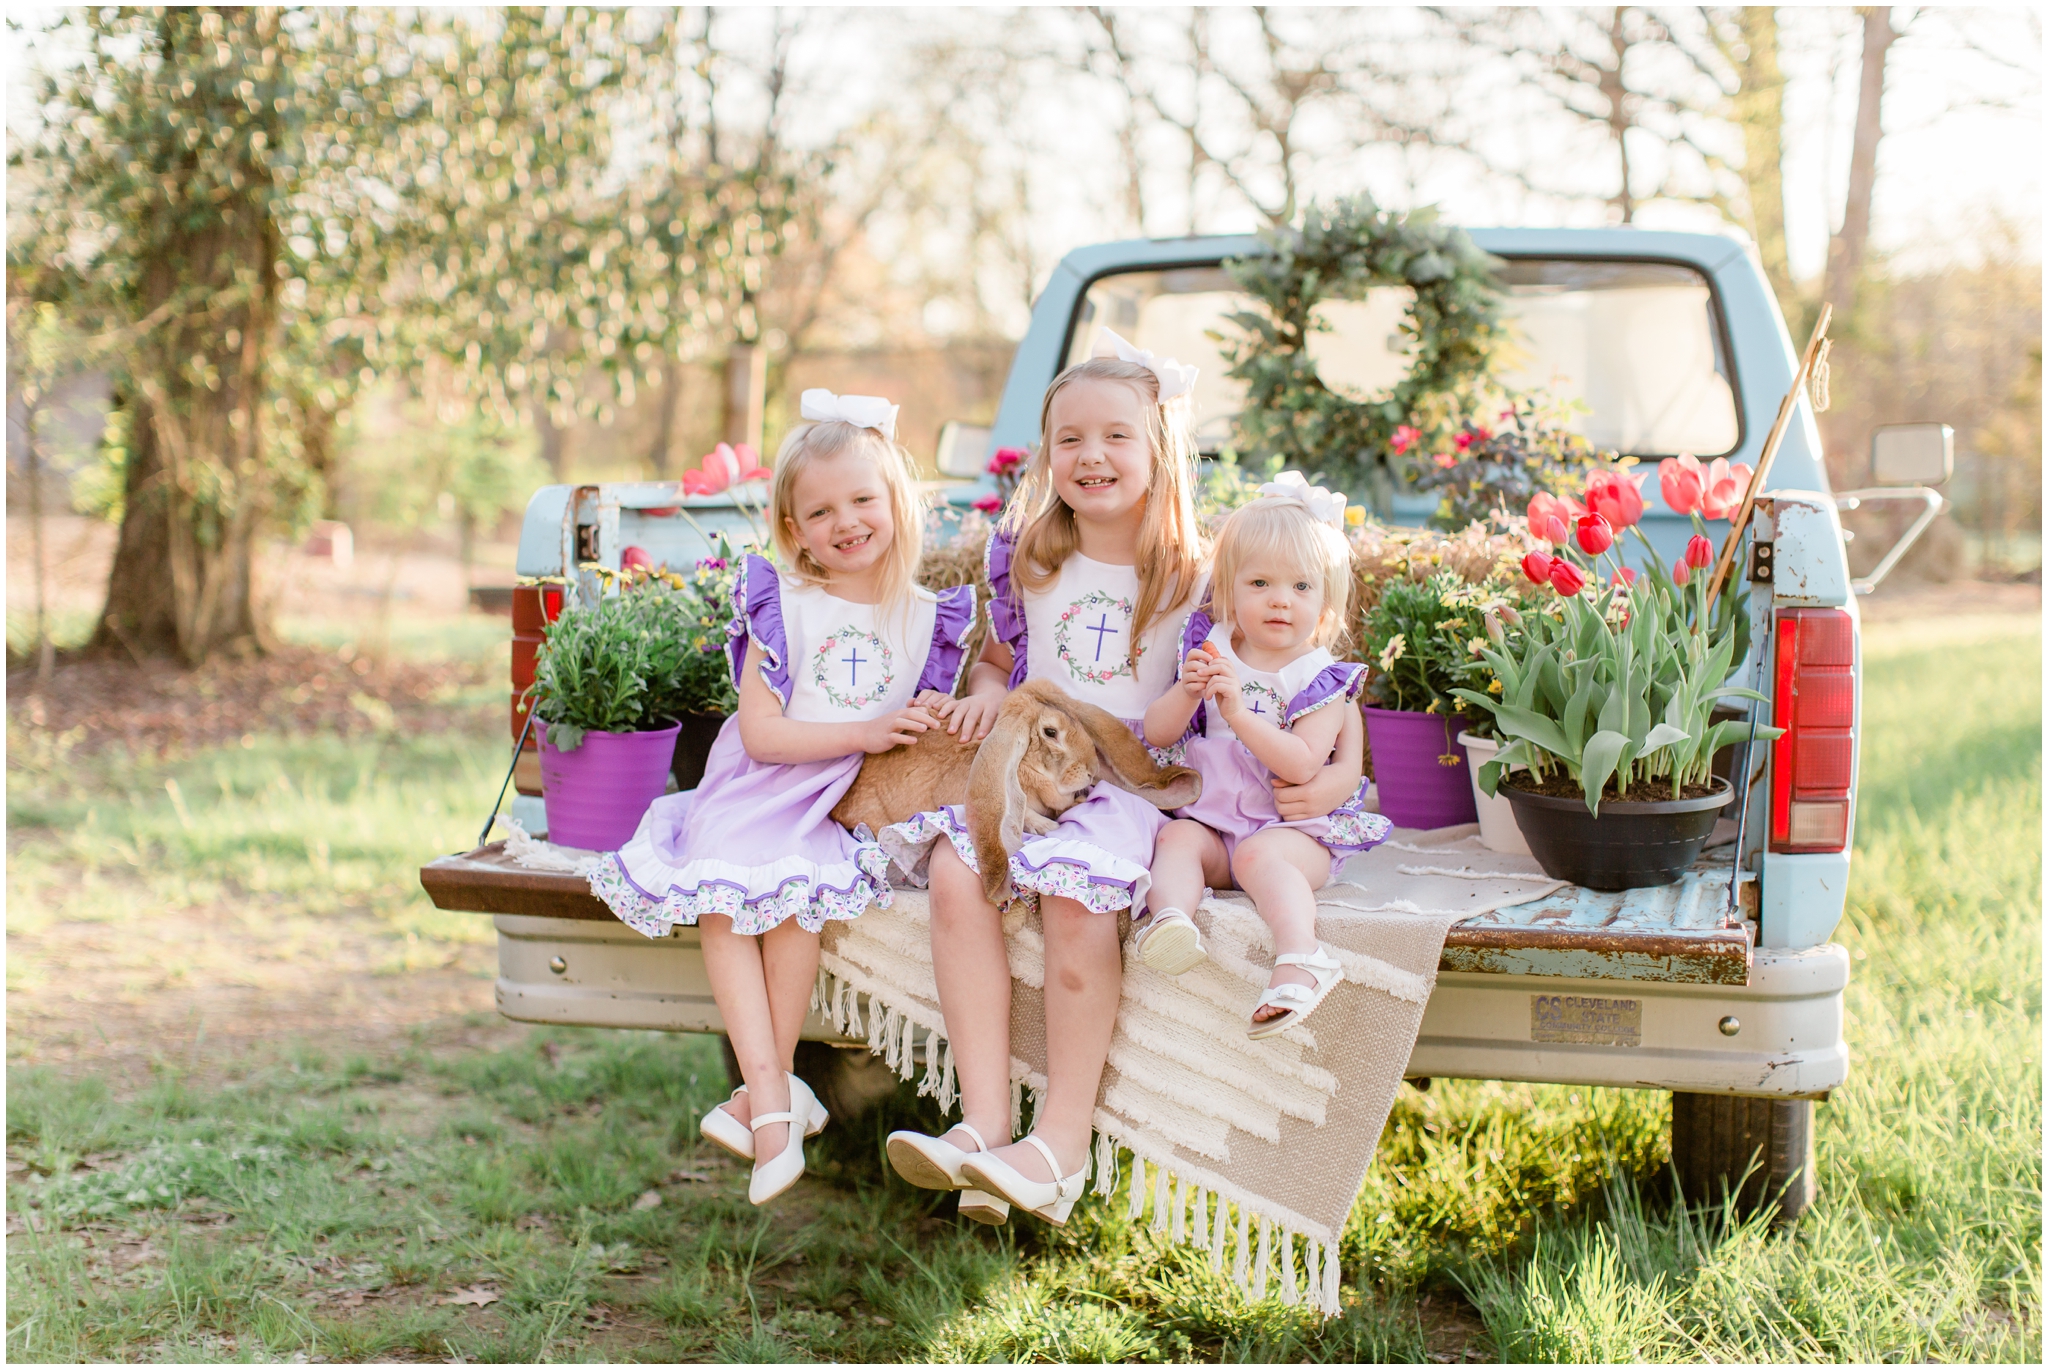 spring minis at red's hay farm with live bunnies and an antique truck with family photographer alyssa rachelle photography